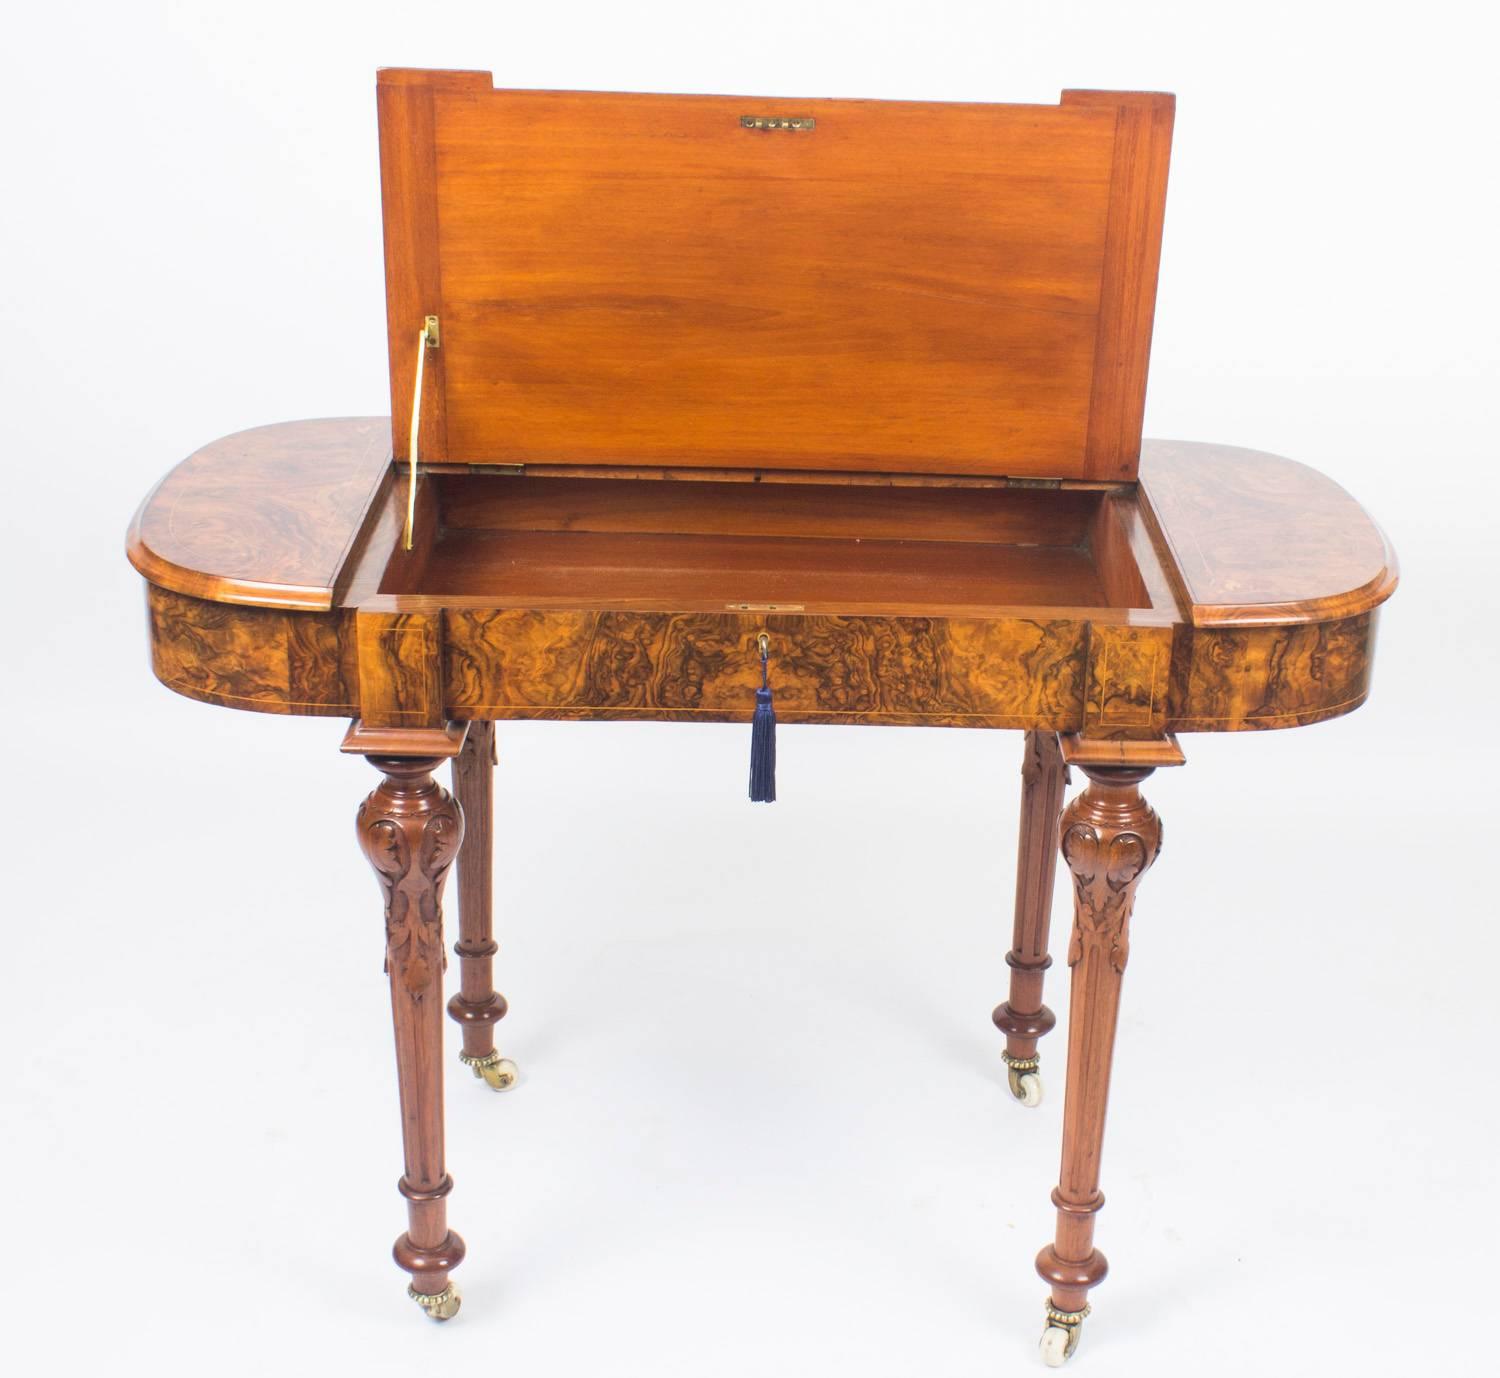 Late 19th Century Antique Burr Walnut and Marquetry Writing Table Desk, 19th Century